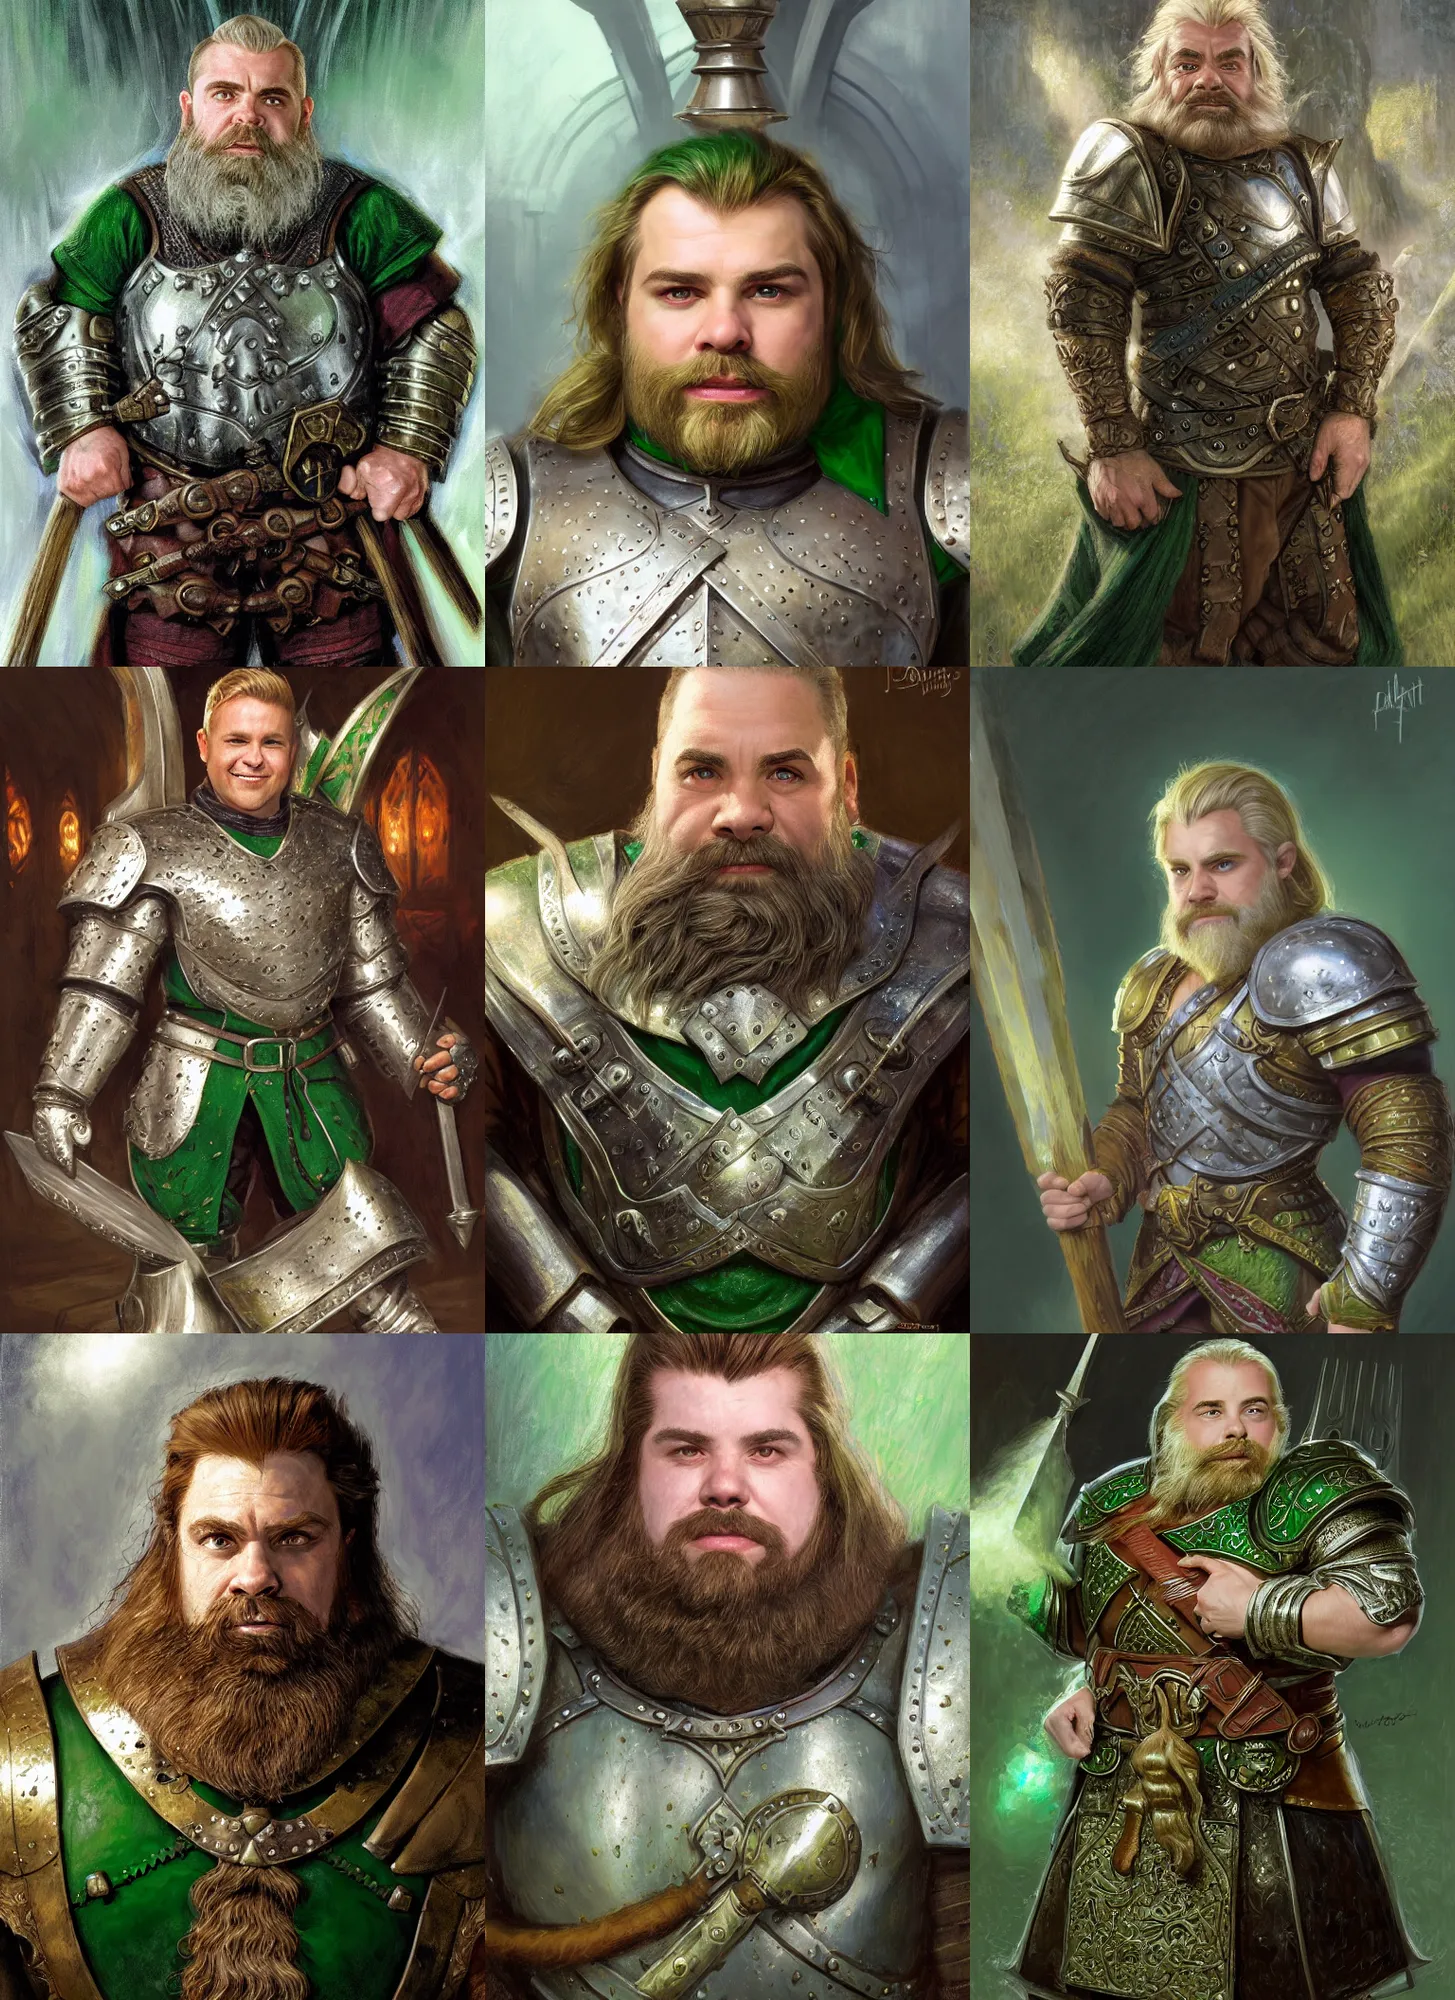 Prompt: portrait, fantasy beardless dwarf cleric, young adult, no beard, short blonde hair combed to one side, silver and emerald breastplate, clean shaven, slightly smirking, style by donato giancola, wayne reynolds, jeff easley dramatic light, high detail, cinematic lighting, artststion, dungeons and dragons